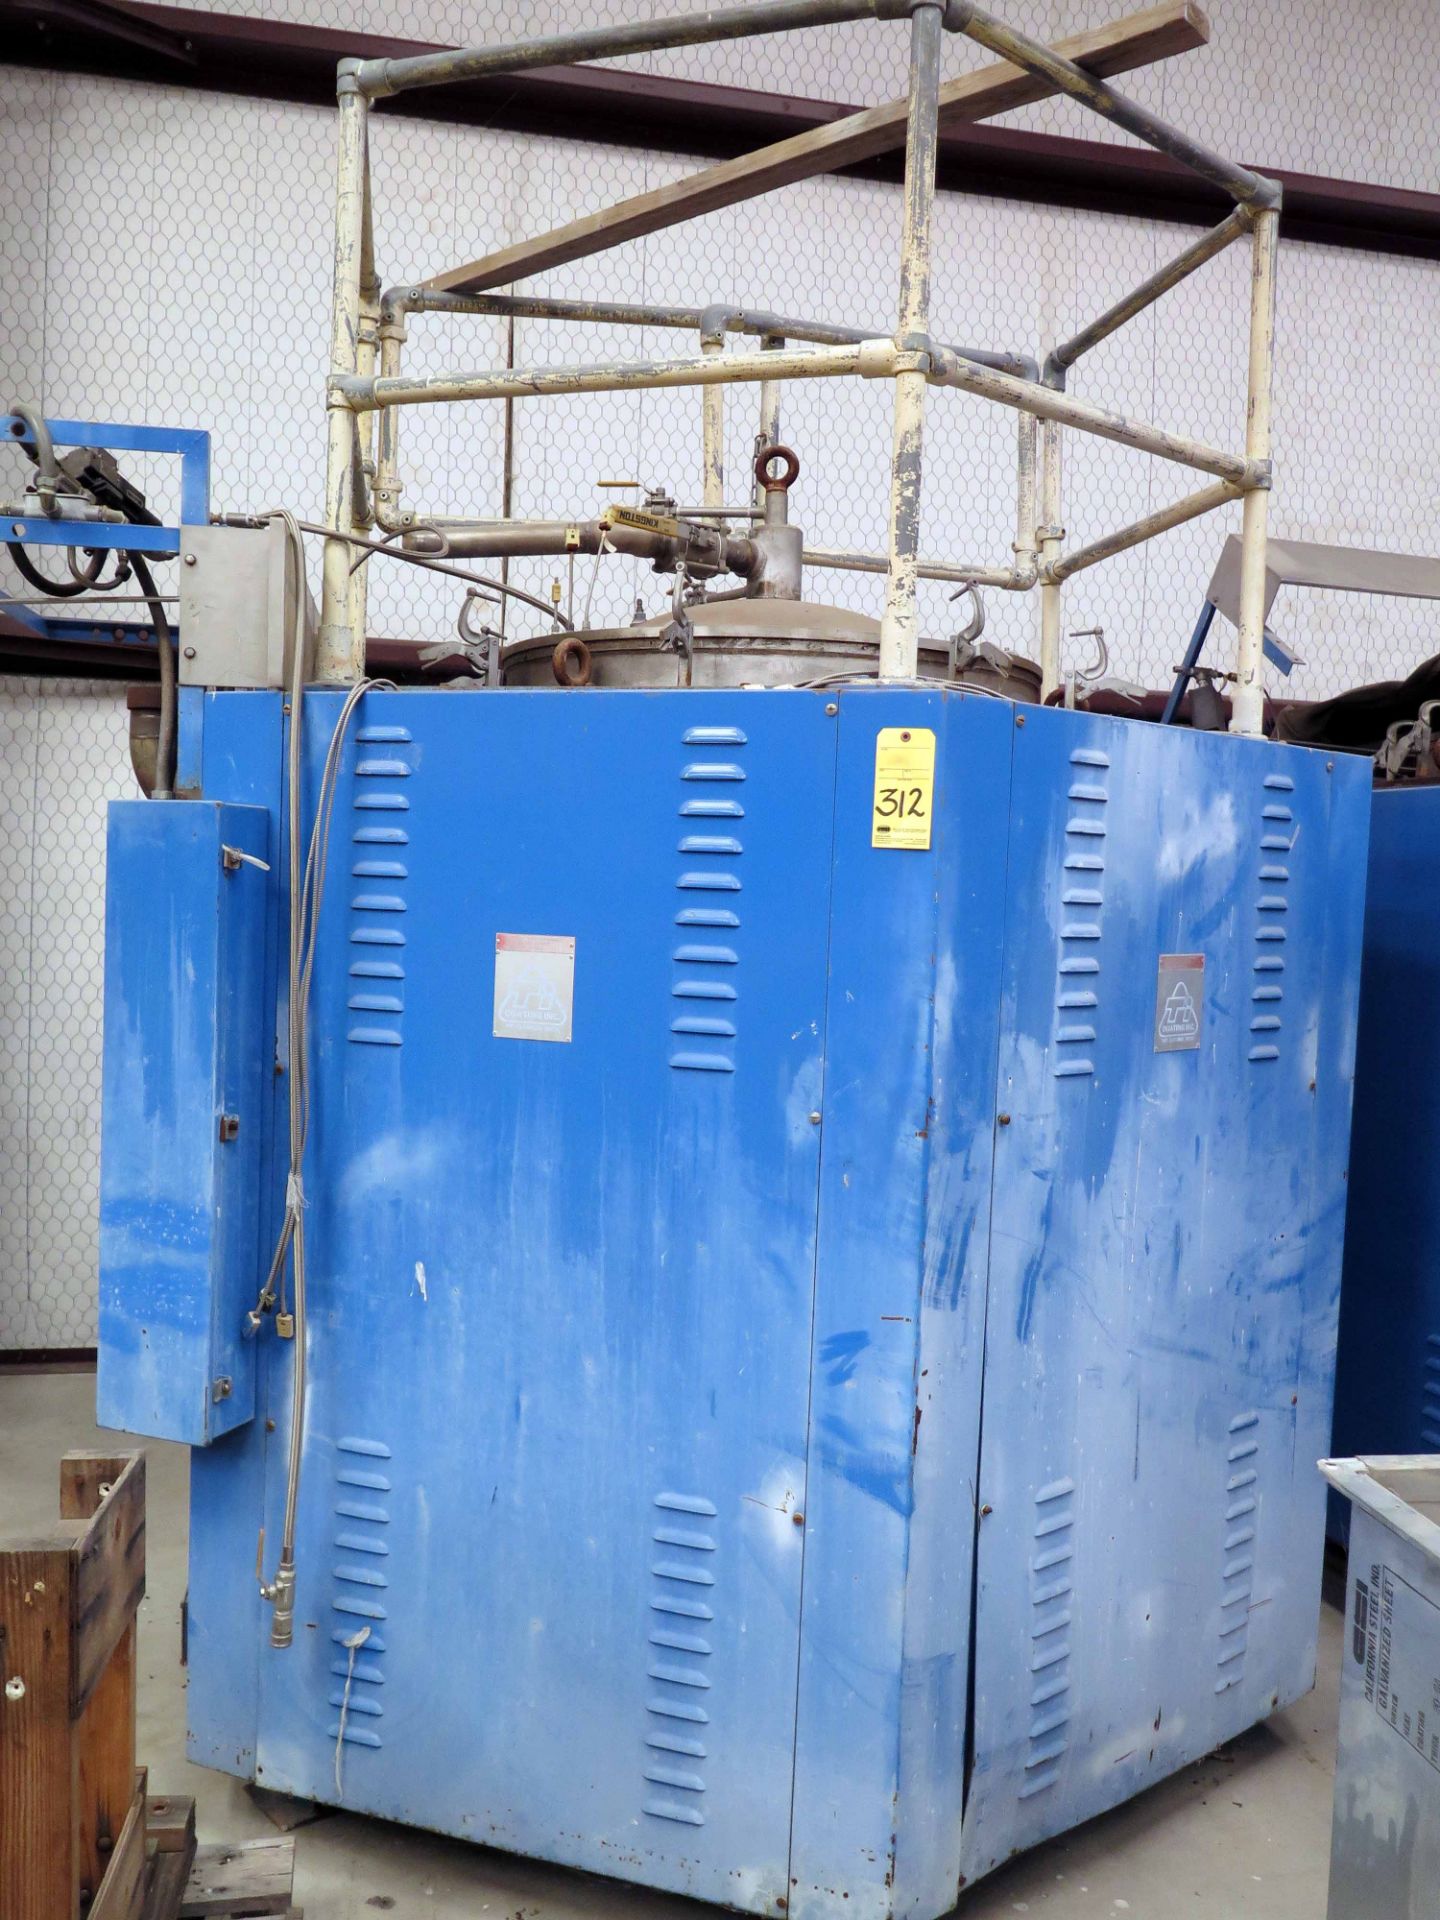 FLUORIDE ION CLEANING SYSTEM, TR COATING INC, including (2) 60 KVA & (1) 120 KVA pwr. supplies,